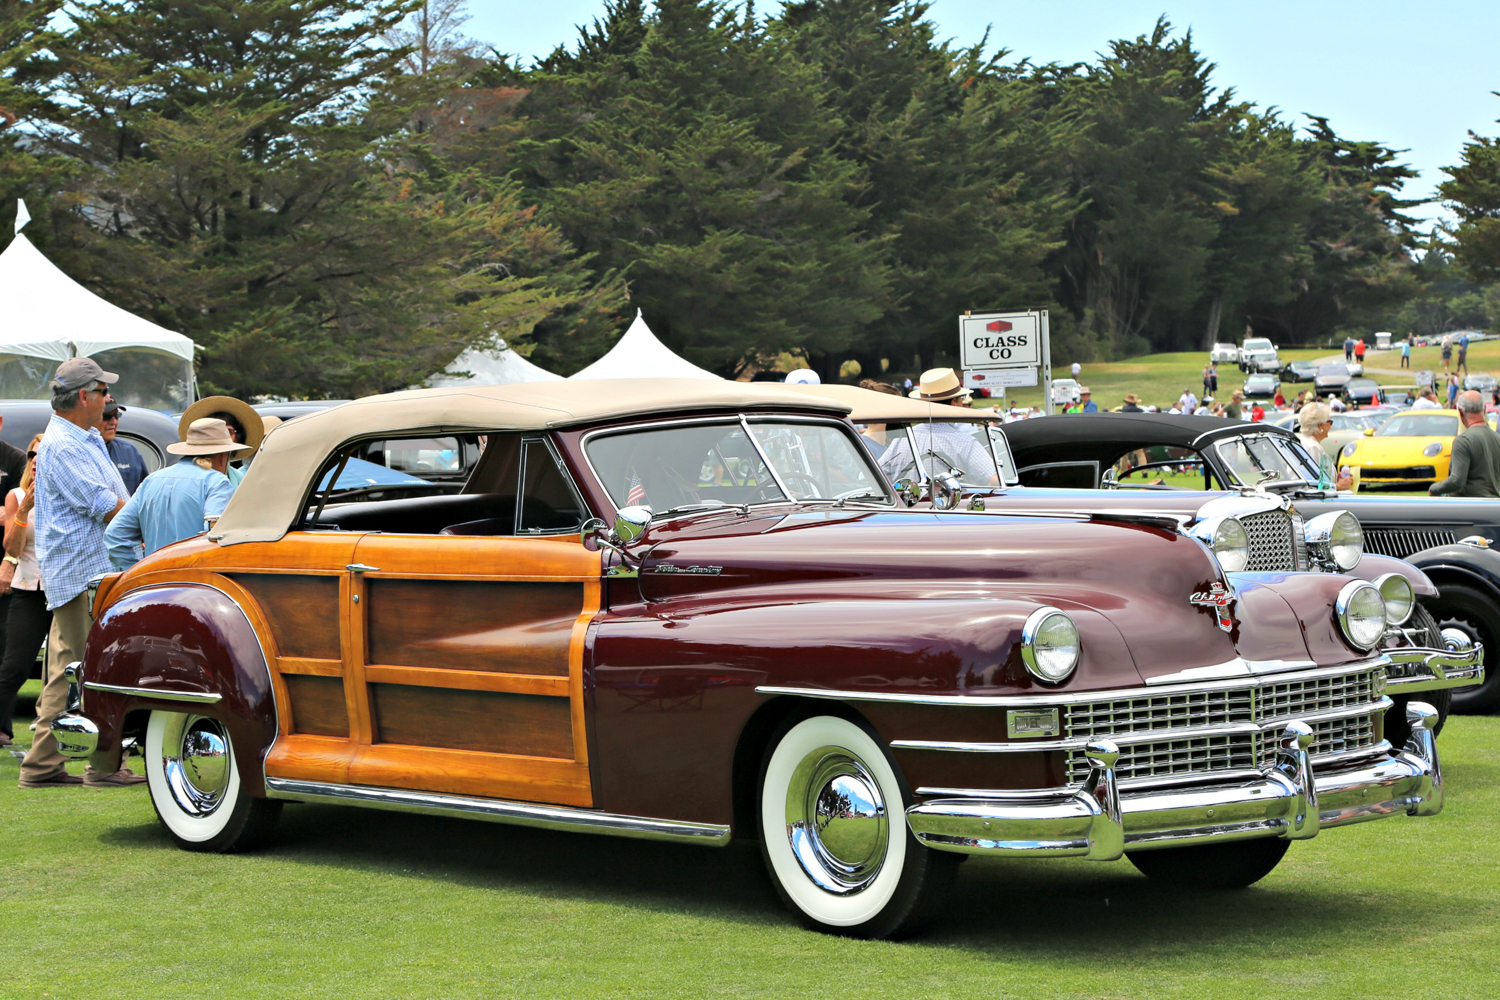 1946 Chrysler Town & Country. Donald Barnes